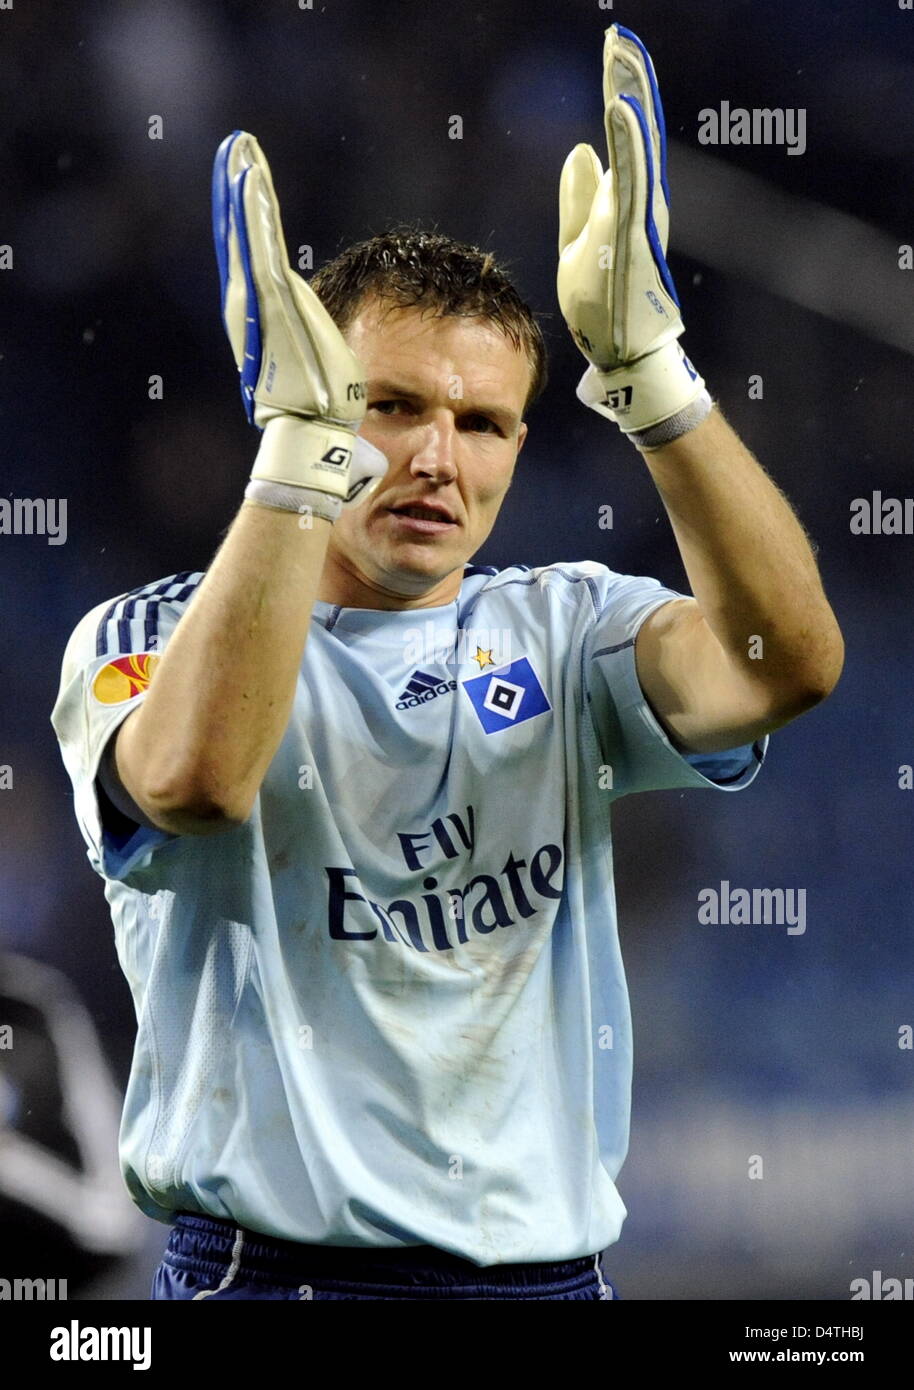 Hamburg?s goalie Frank Rost cheers to the fans after the UEFA Europa League match SV Hamburg vs Celtic Glasgow at HSH Nordbankarena stadium of Hambur, Germany, 05 November 2009. The match ended in a goalless draw. Photo: MAURIZIO GAMBARINI Stock Photo